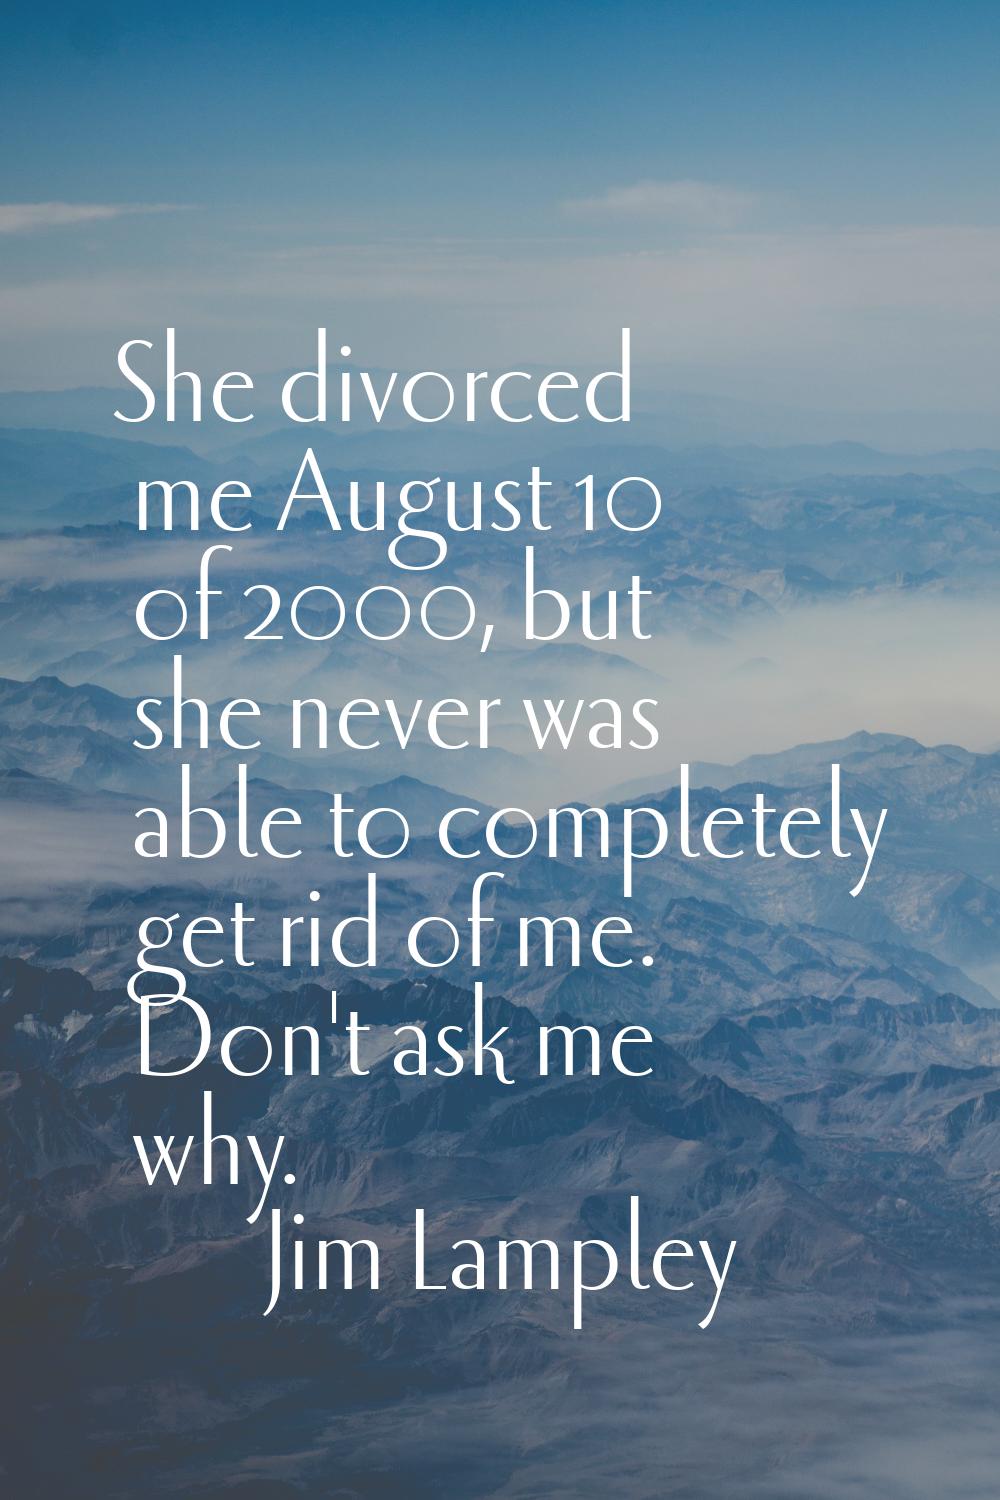 She divorced me August 10 of 2000, but she never was able to completely get rid of me. Don't ask me